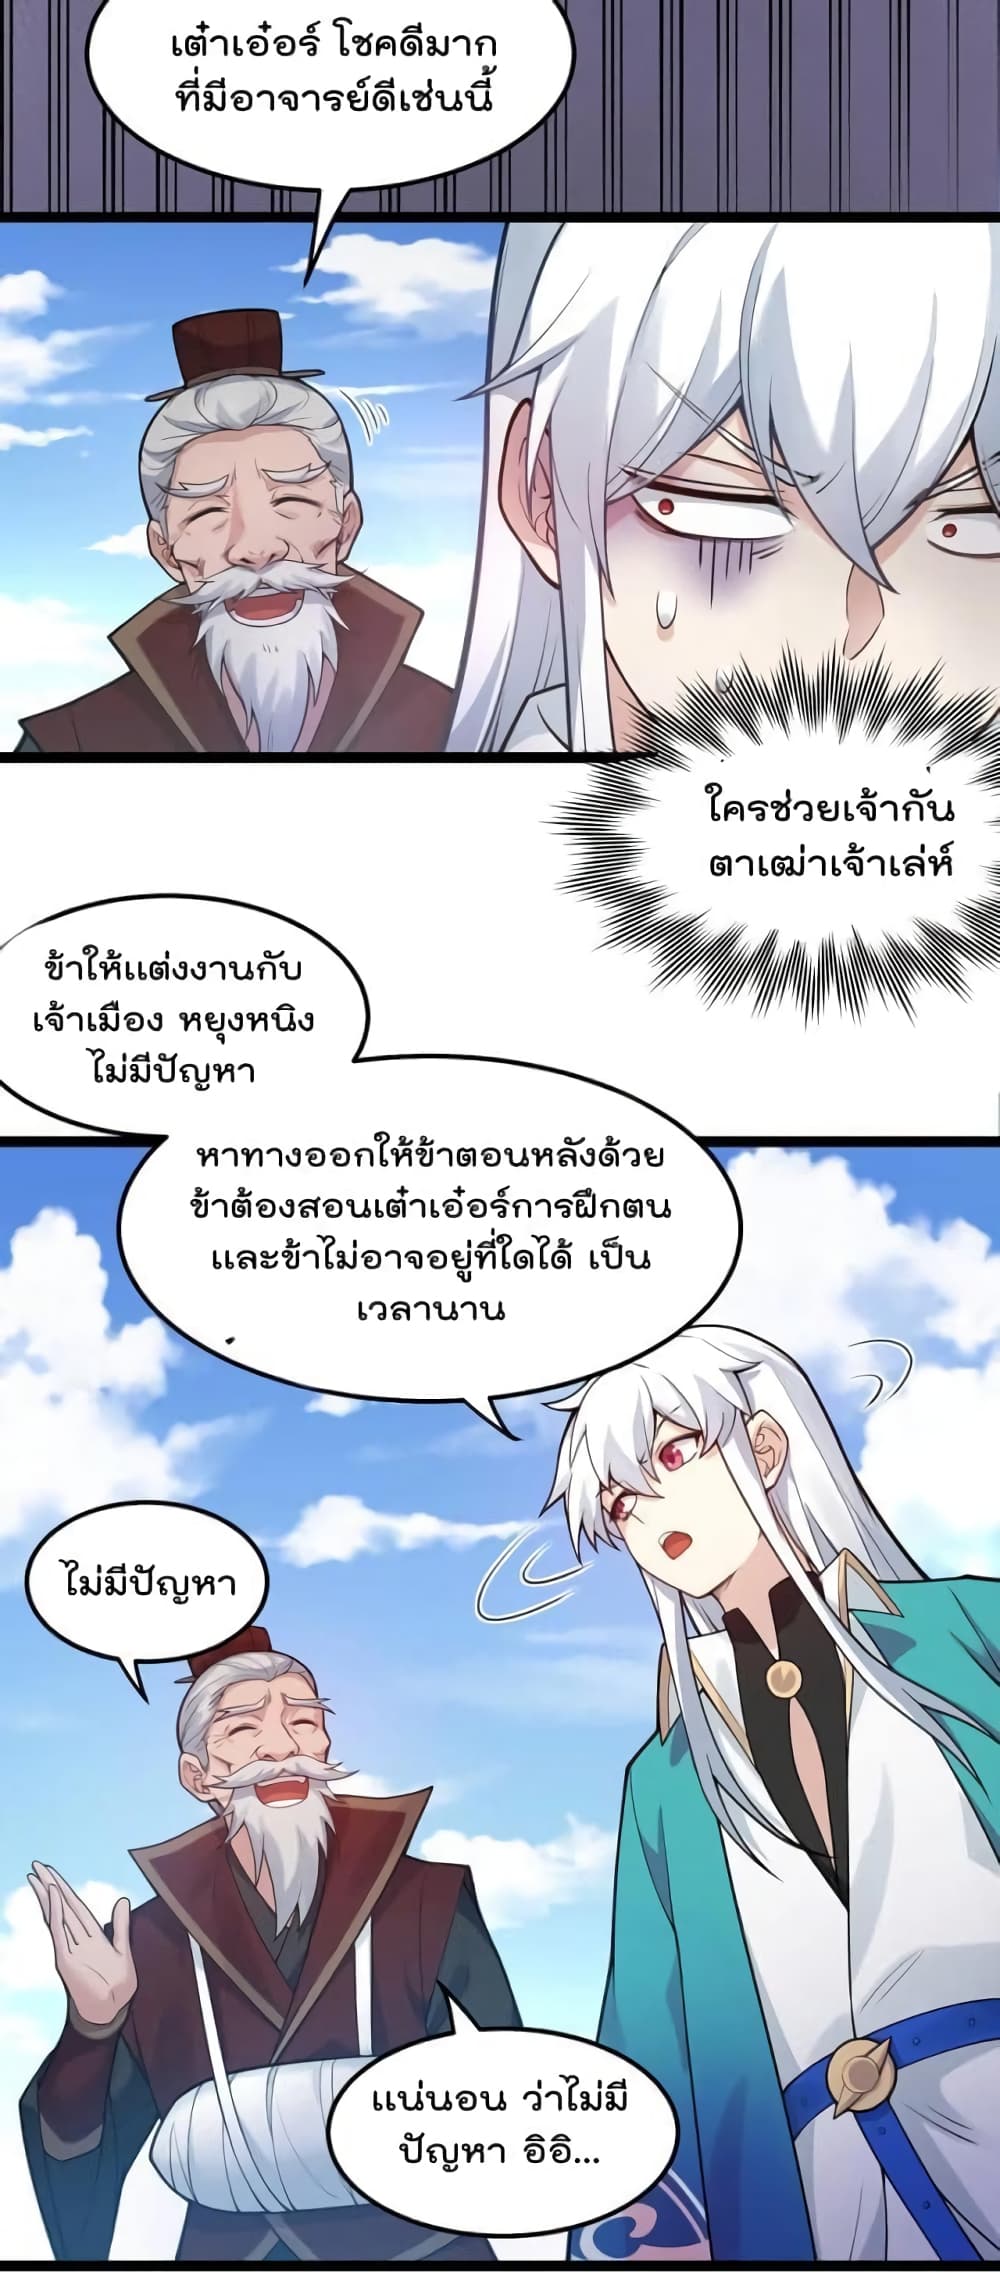 Godsian Masian from Another World ตอนที่ 100 (6)